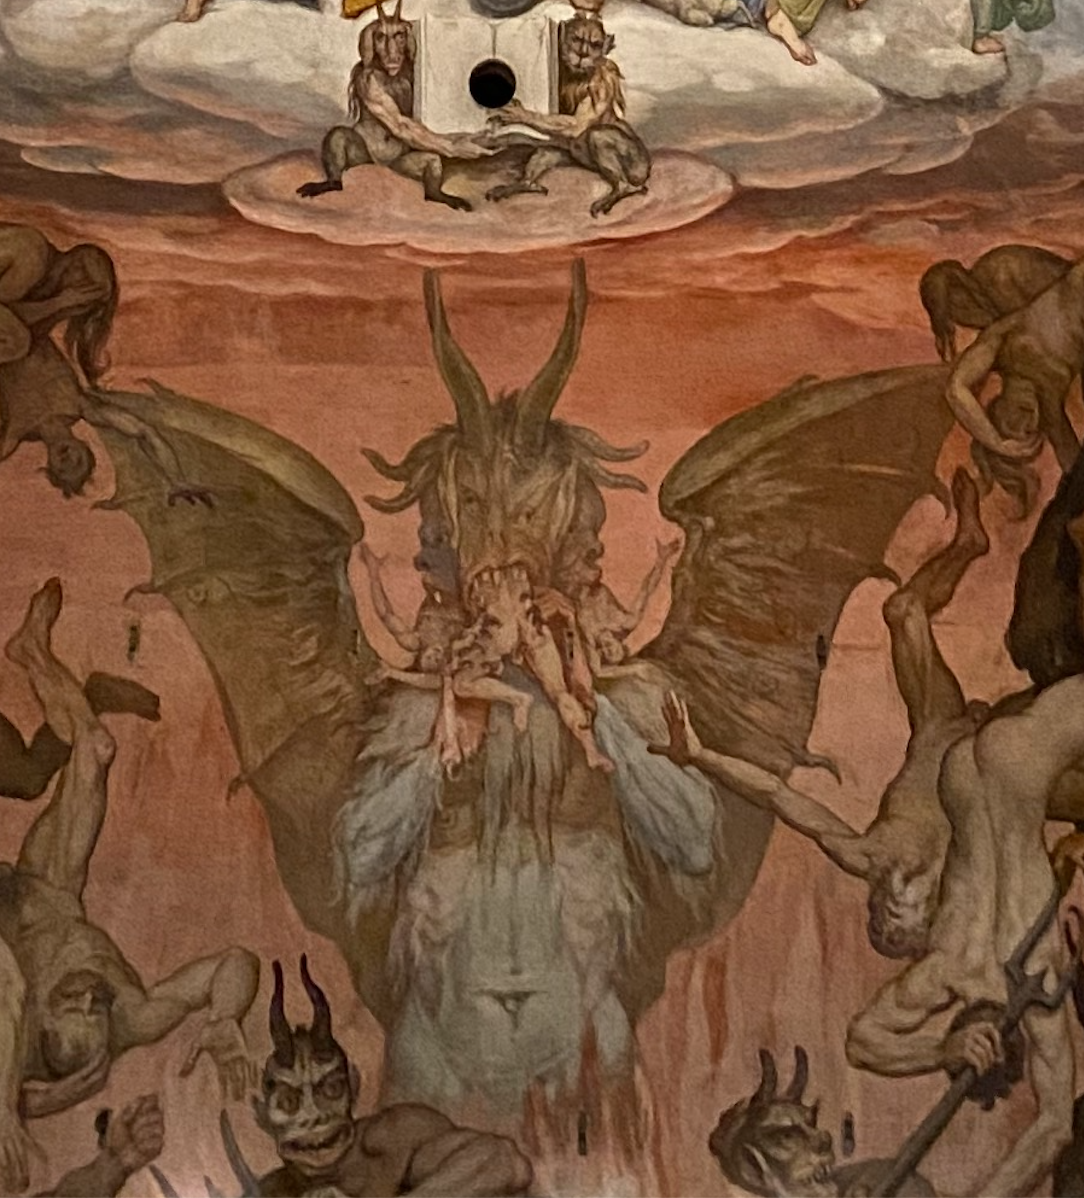 Devil eating human 'alive' is a common theme of the visualisation of Last Judgement of the Christ. We will see similar visualisation in Michelangelo's interoperation of the theme in the ceilings of the Sistine Chapel in Rome.